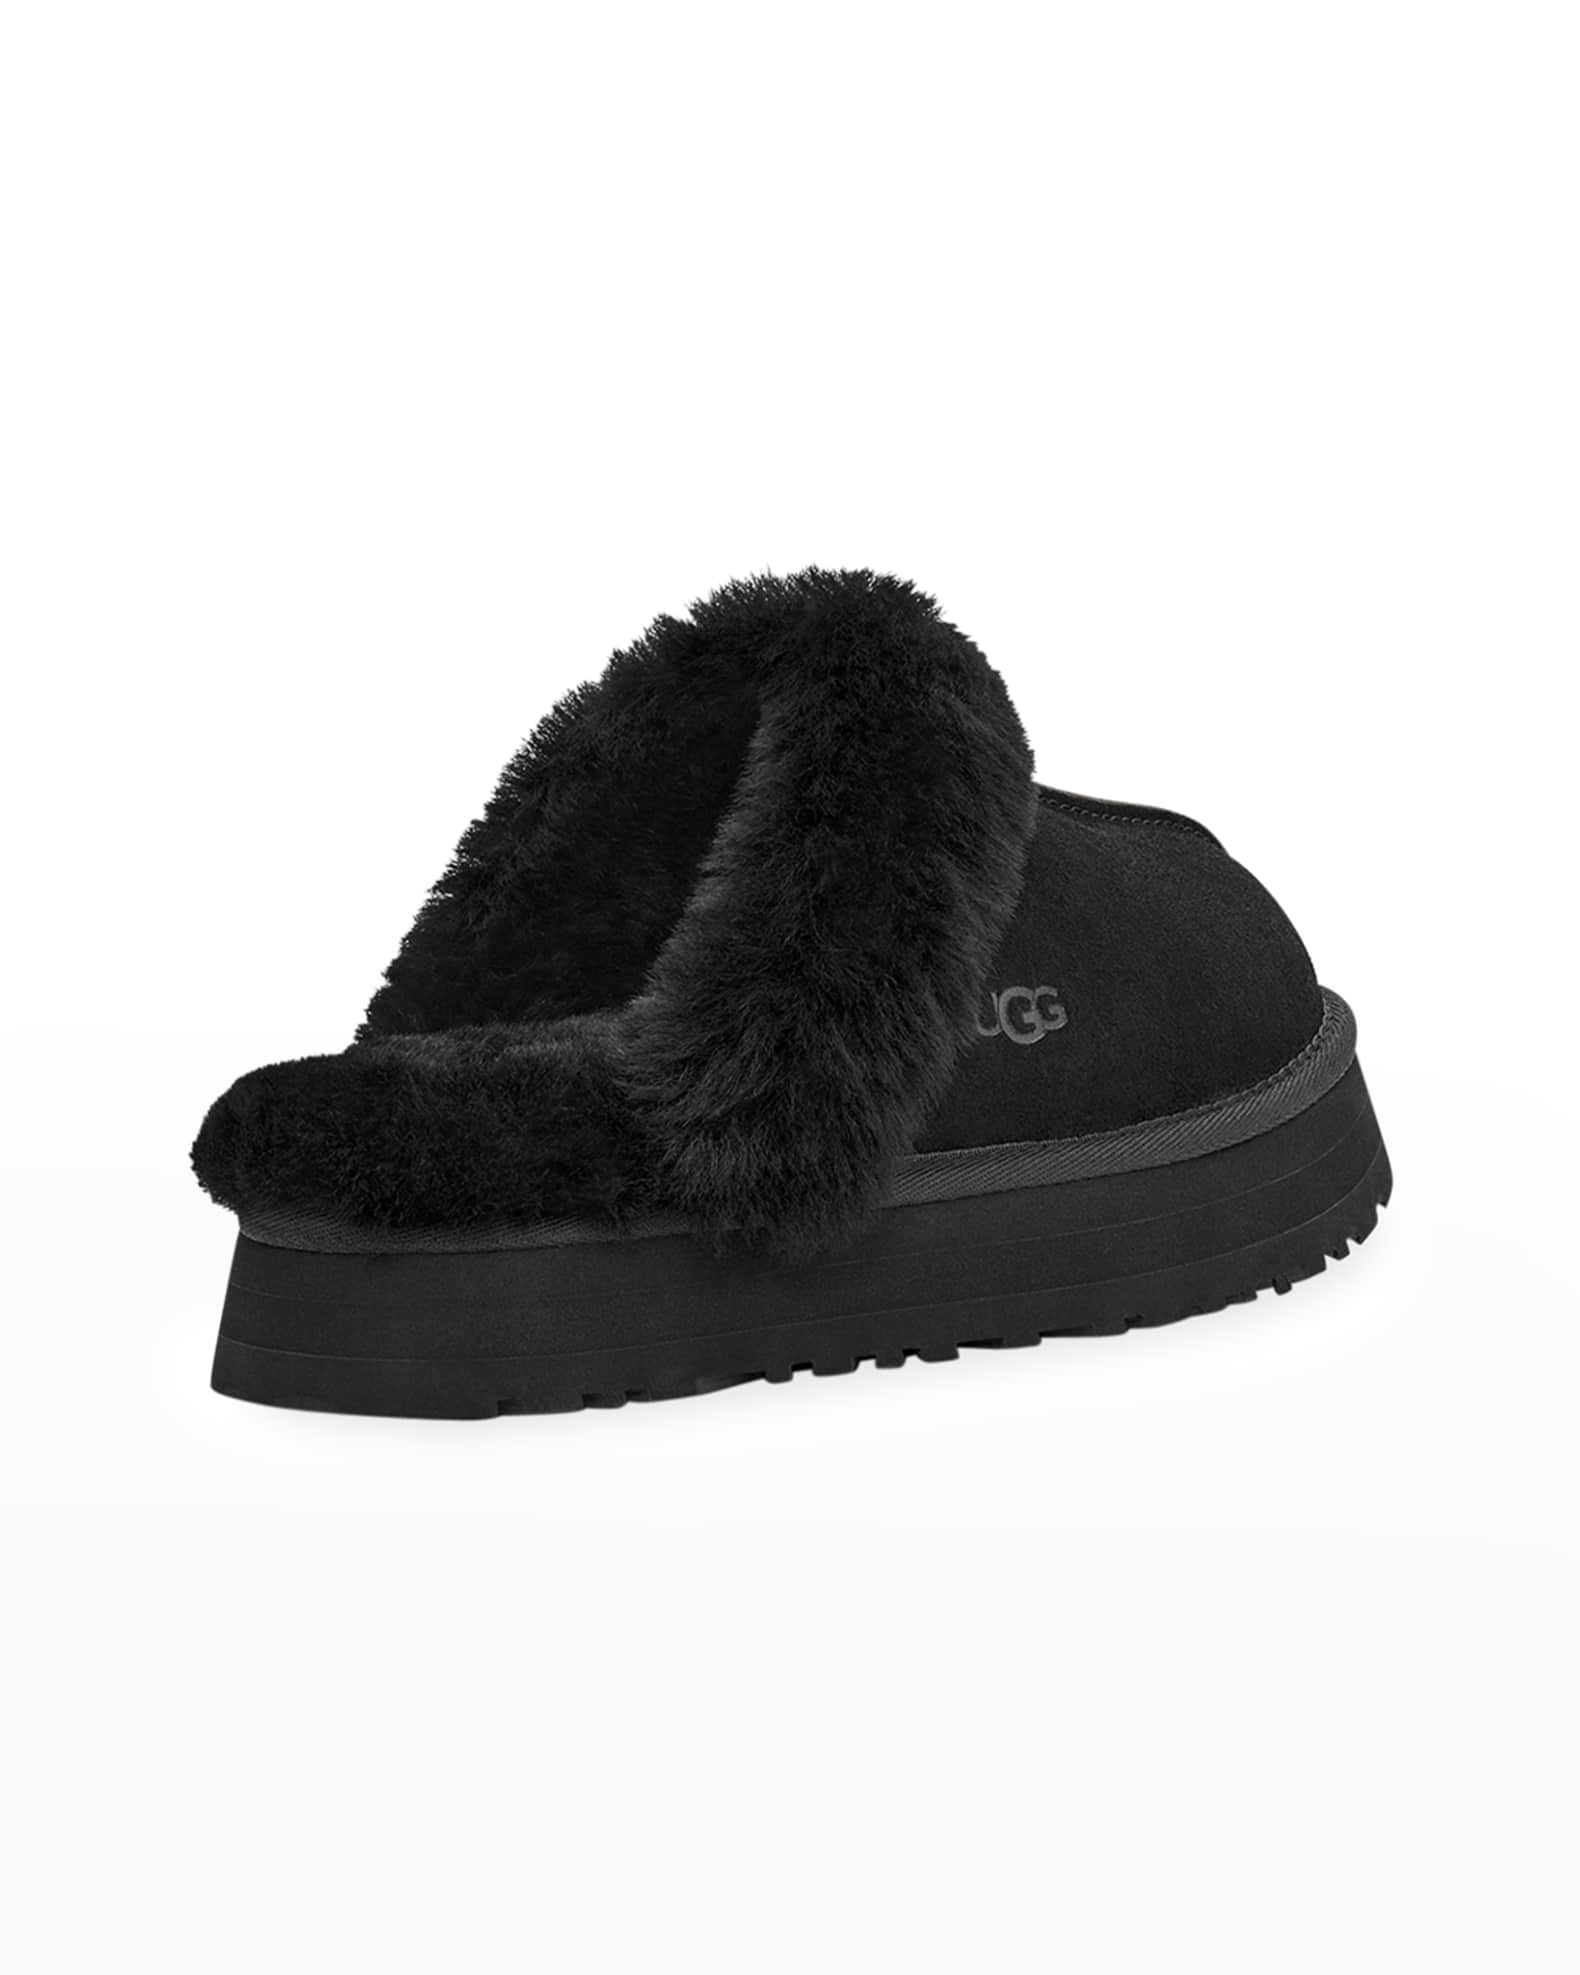 UGG Disquette Suede & Shearling Platform Slippers | Neiman Marcus